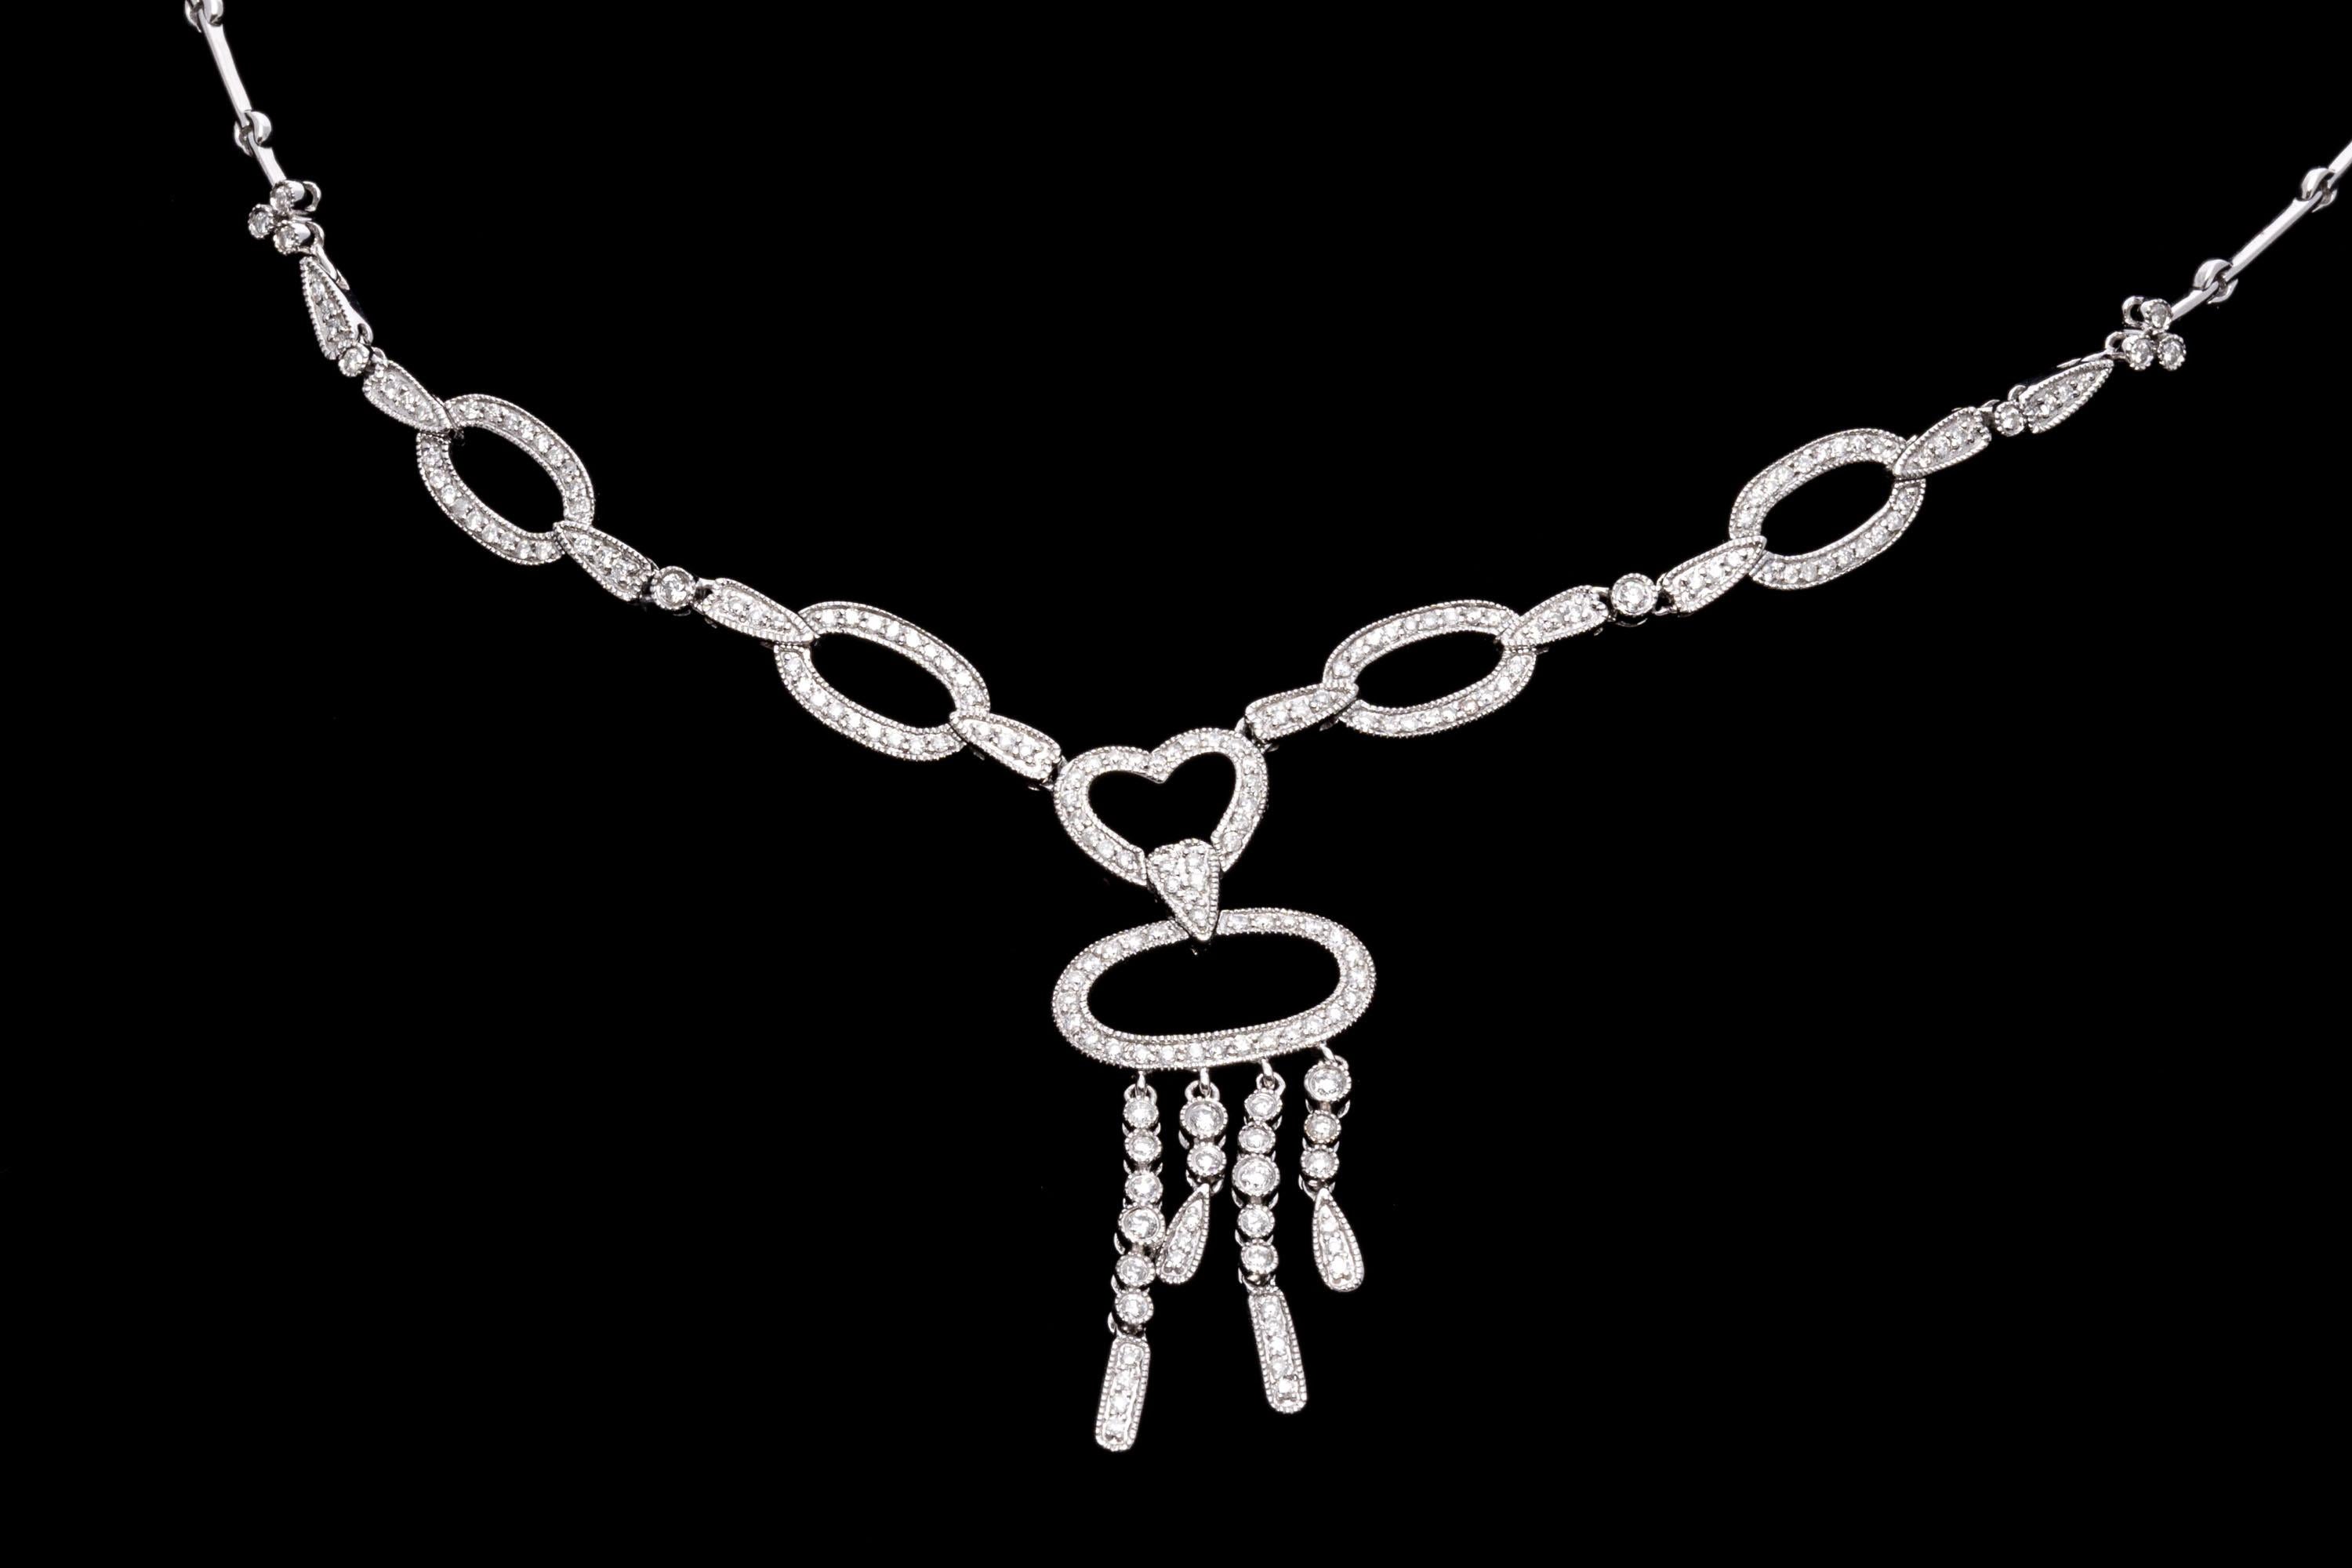 14k White Gold Impressive Diamond Set Open Link Necklace With Drop, 1.59 TCW For Sale 1